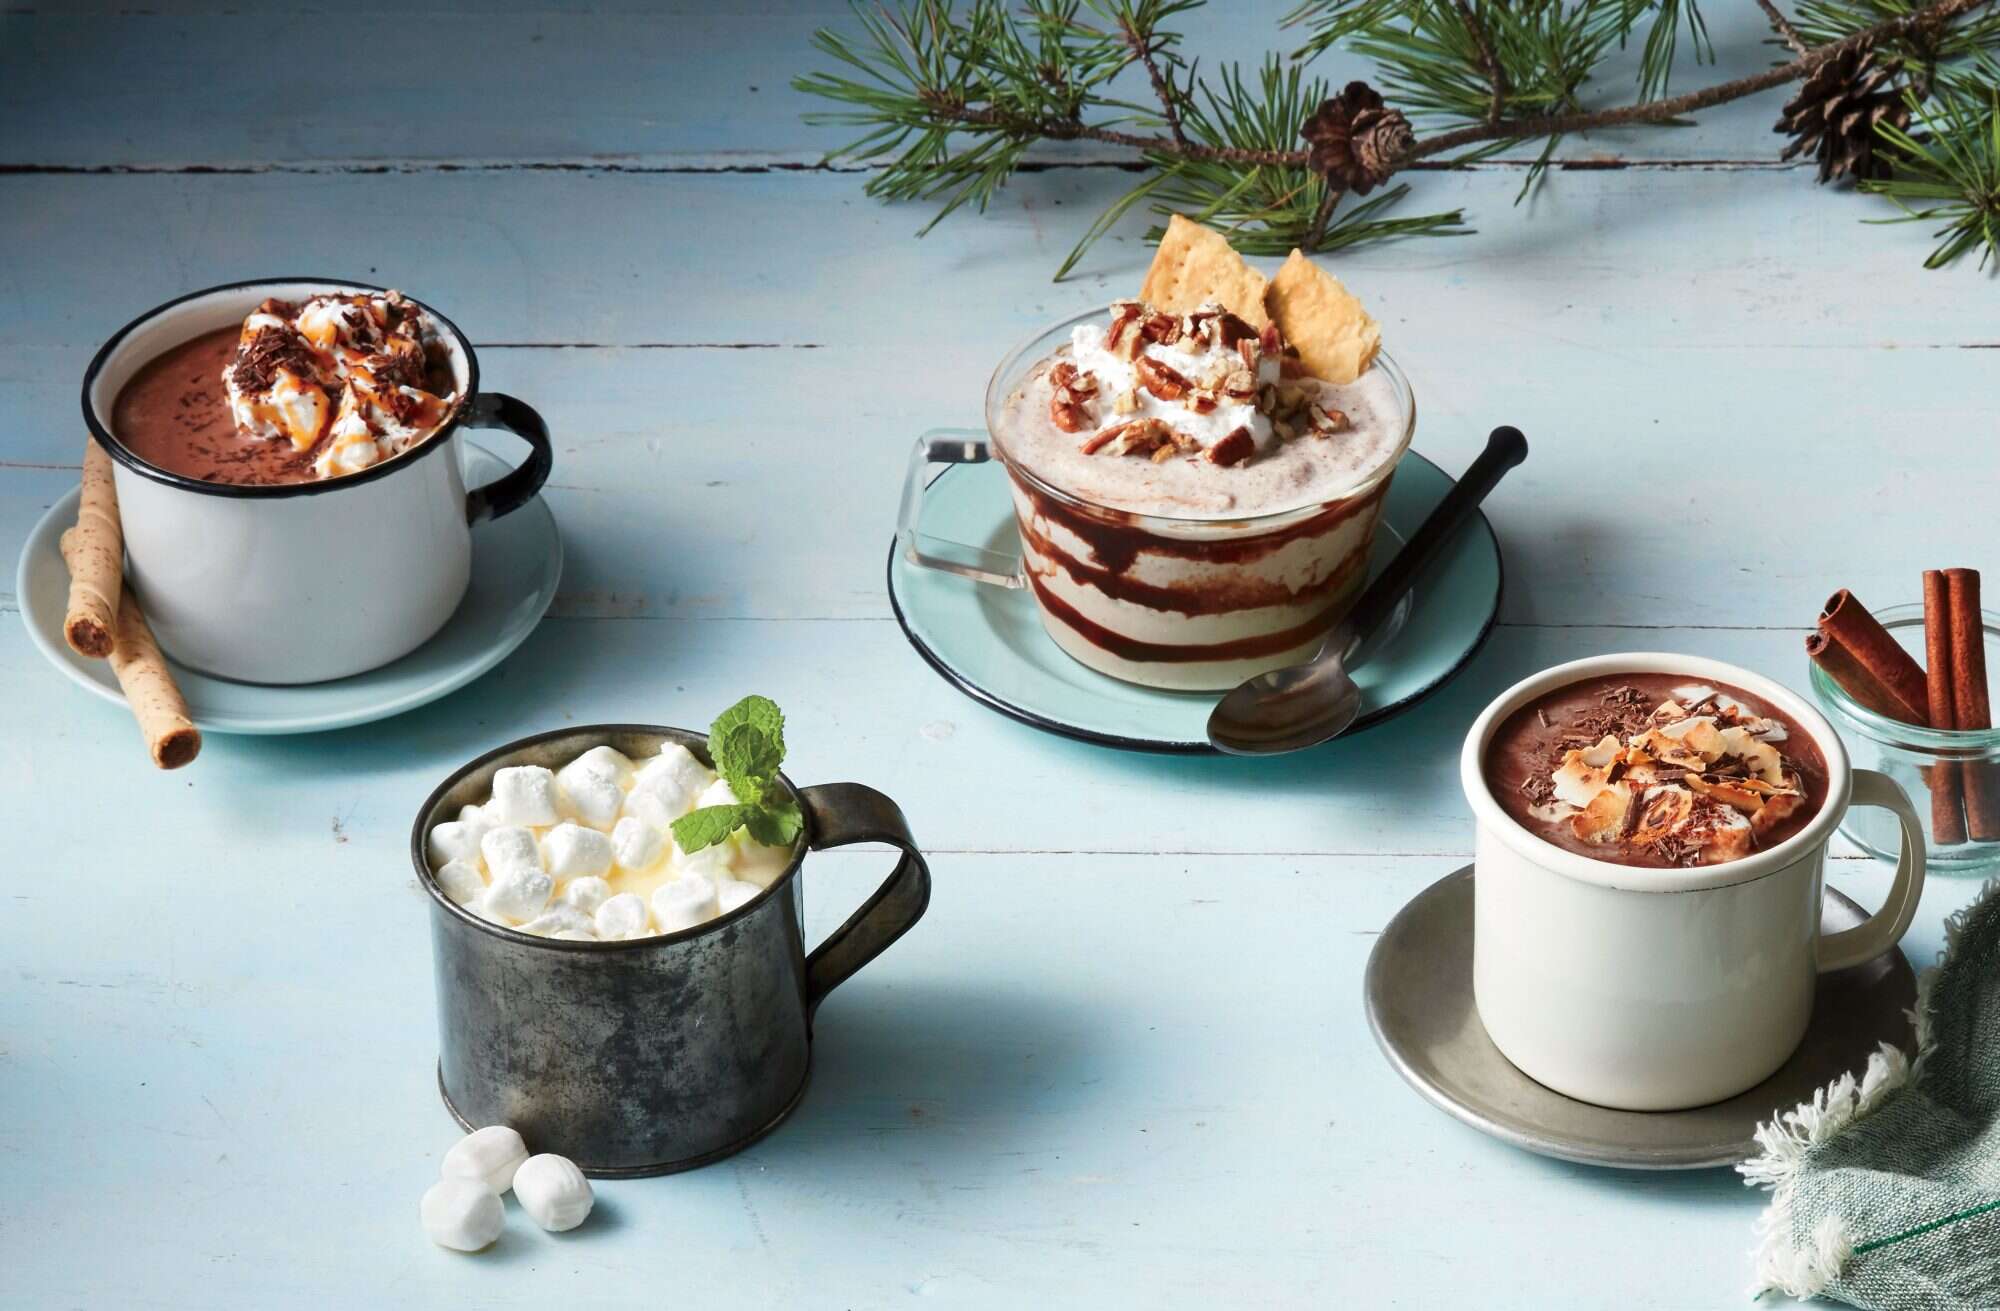 6 Tips for a FABULOUS Hot Cocoa Bar